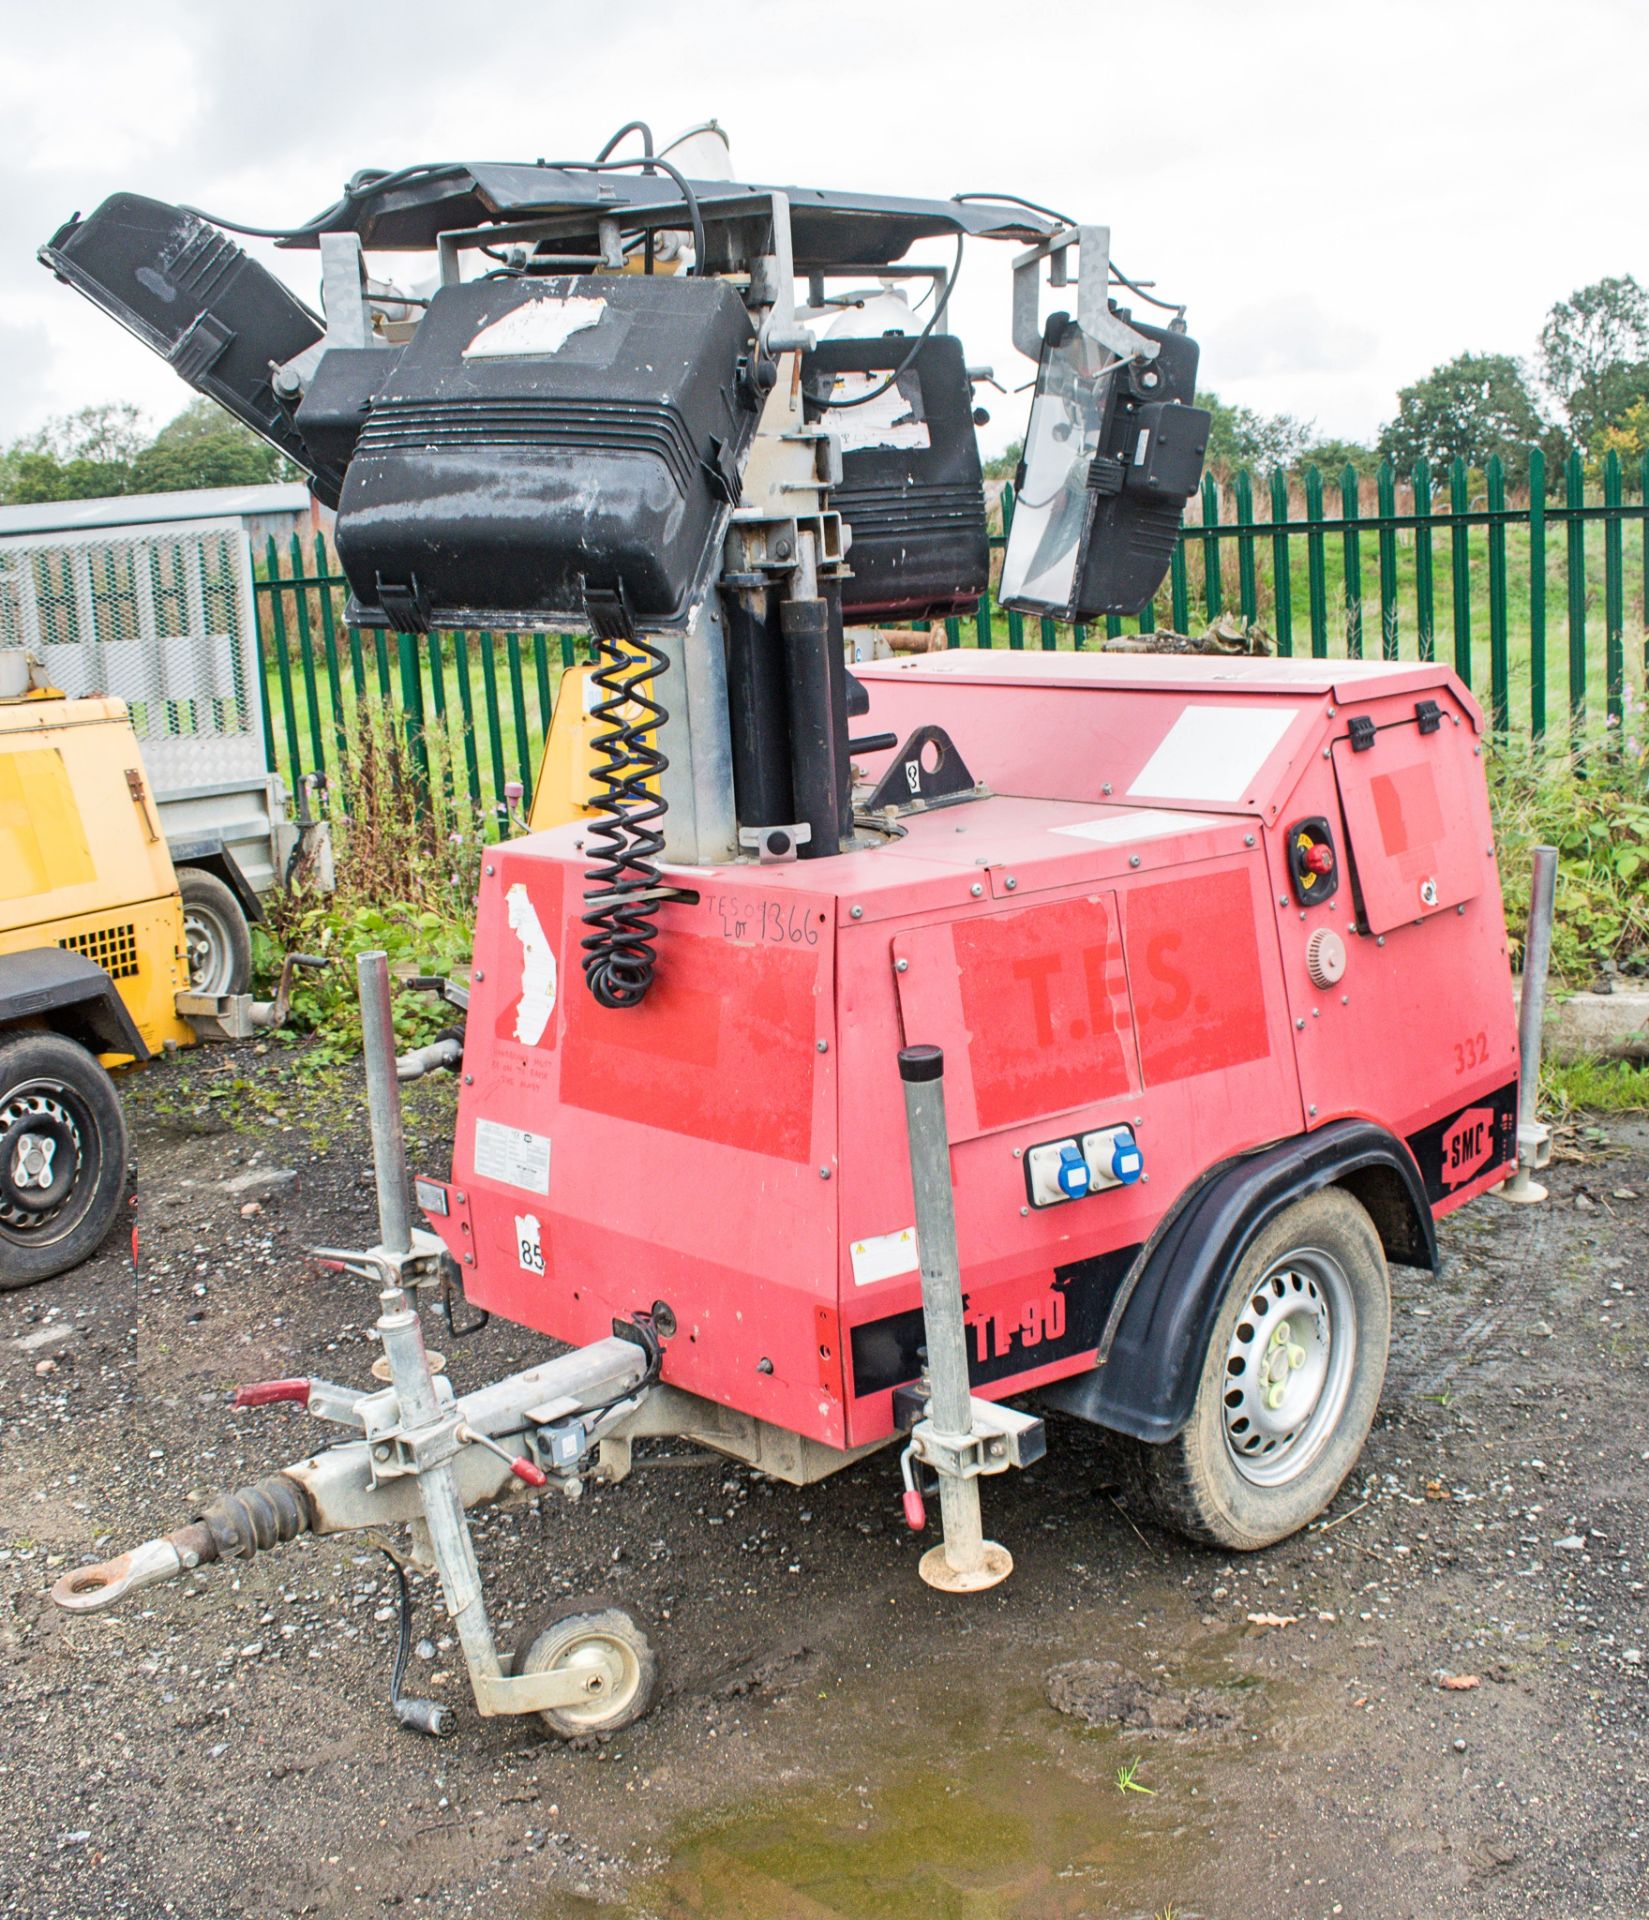 SMC TL90 diesel driven mobile lighting tower Year: 2011 S/N: 90119005 Recorded Hours: No power so - Image 2 of 6